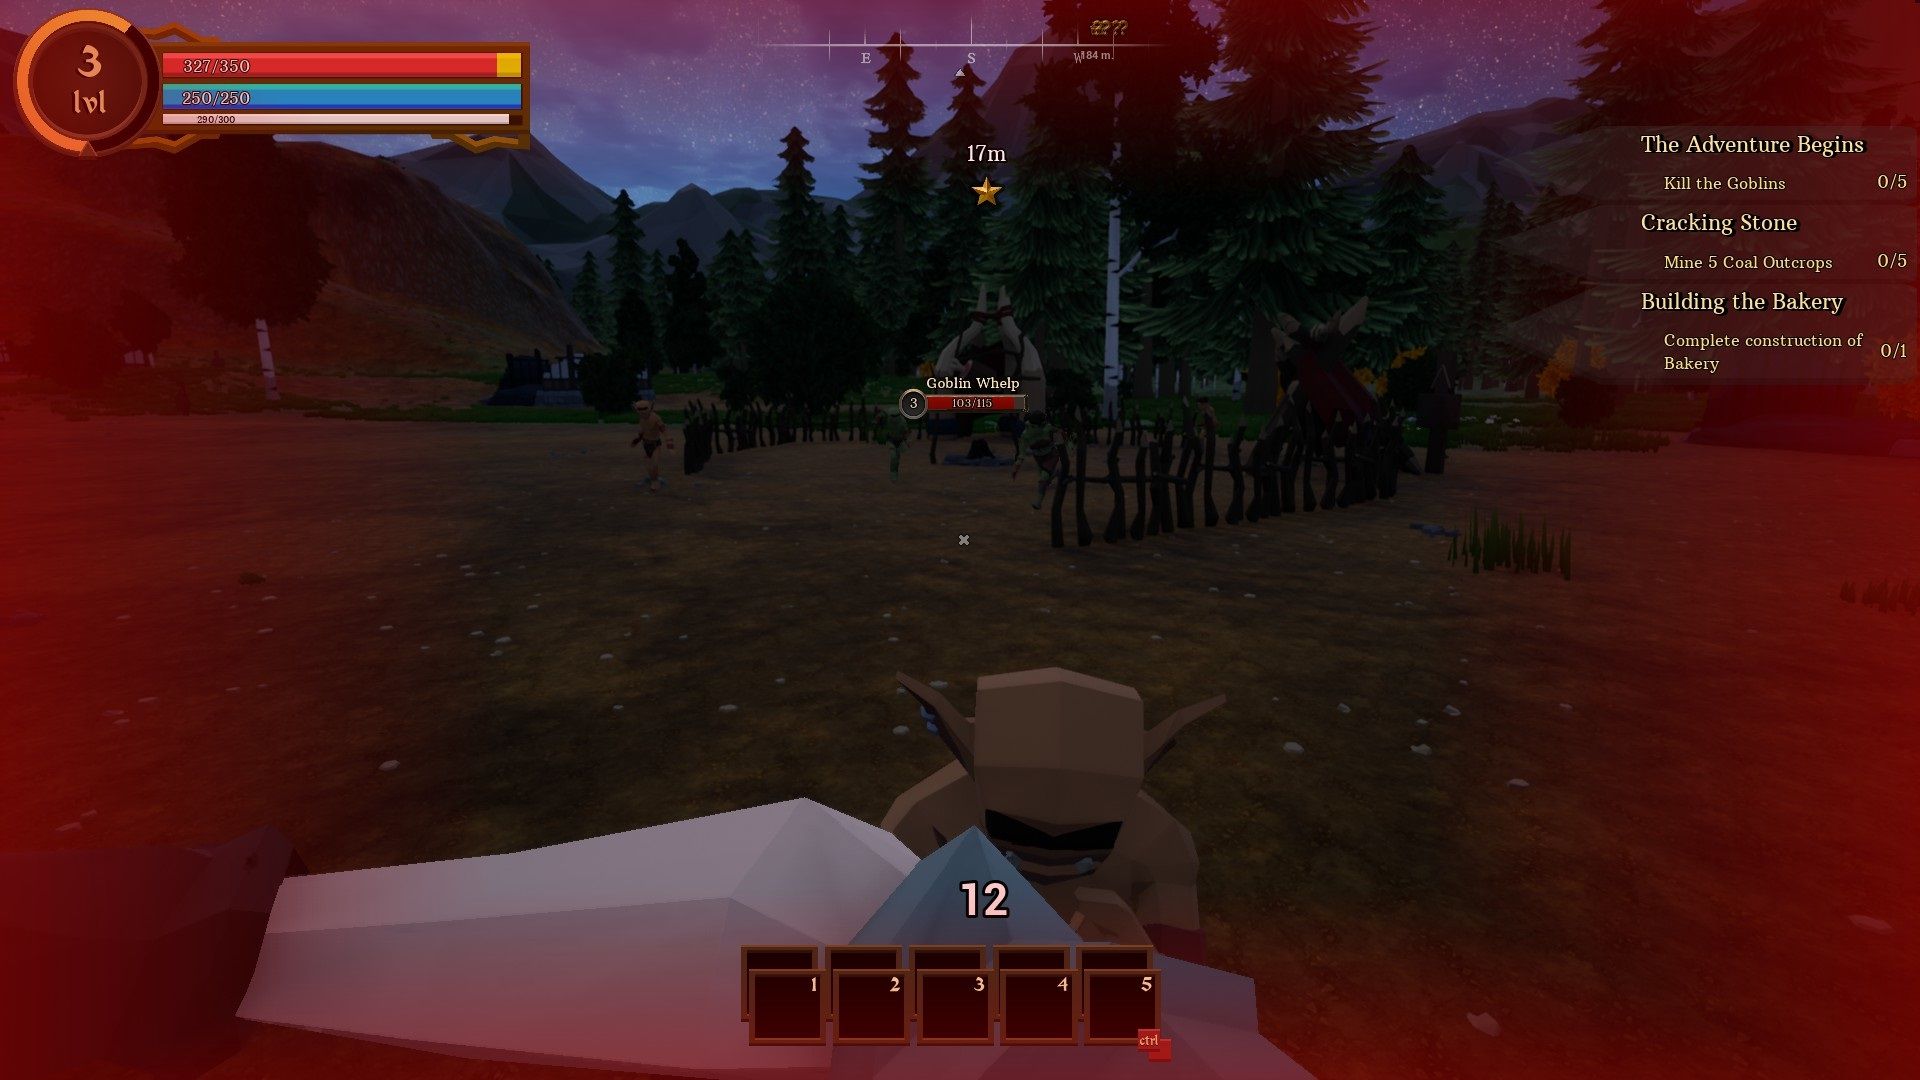 A goblin attacking the player near the goblin camp in The Bloodline.